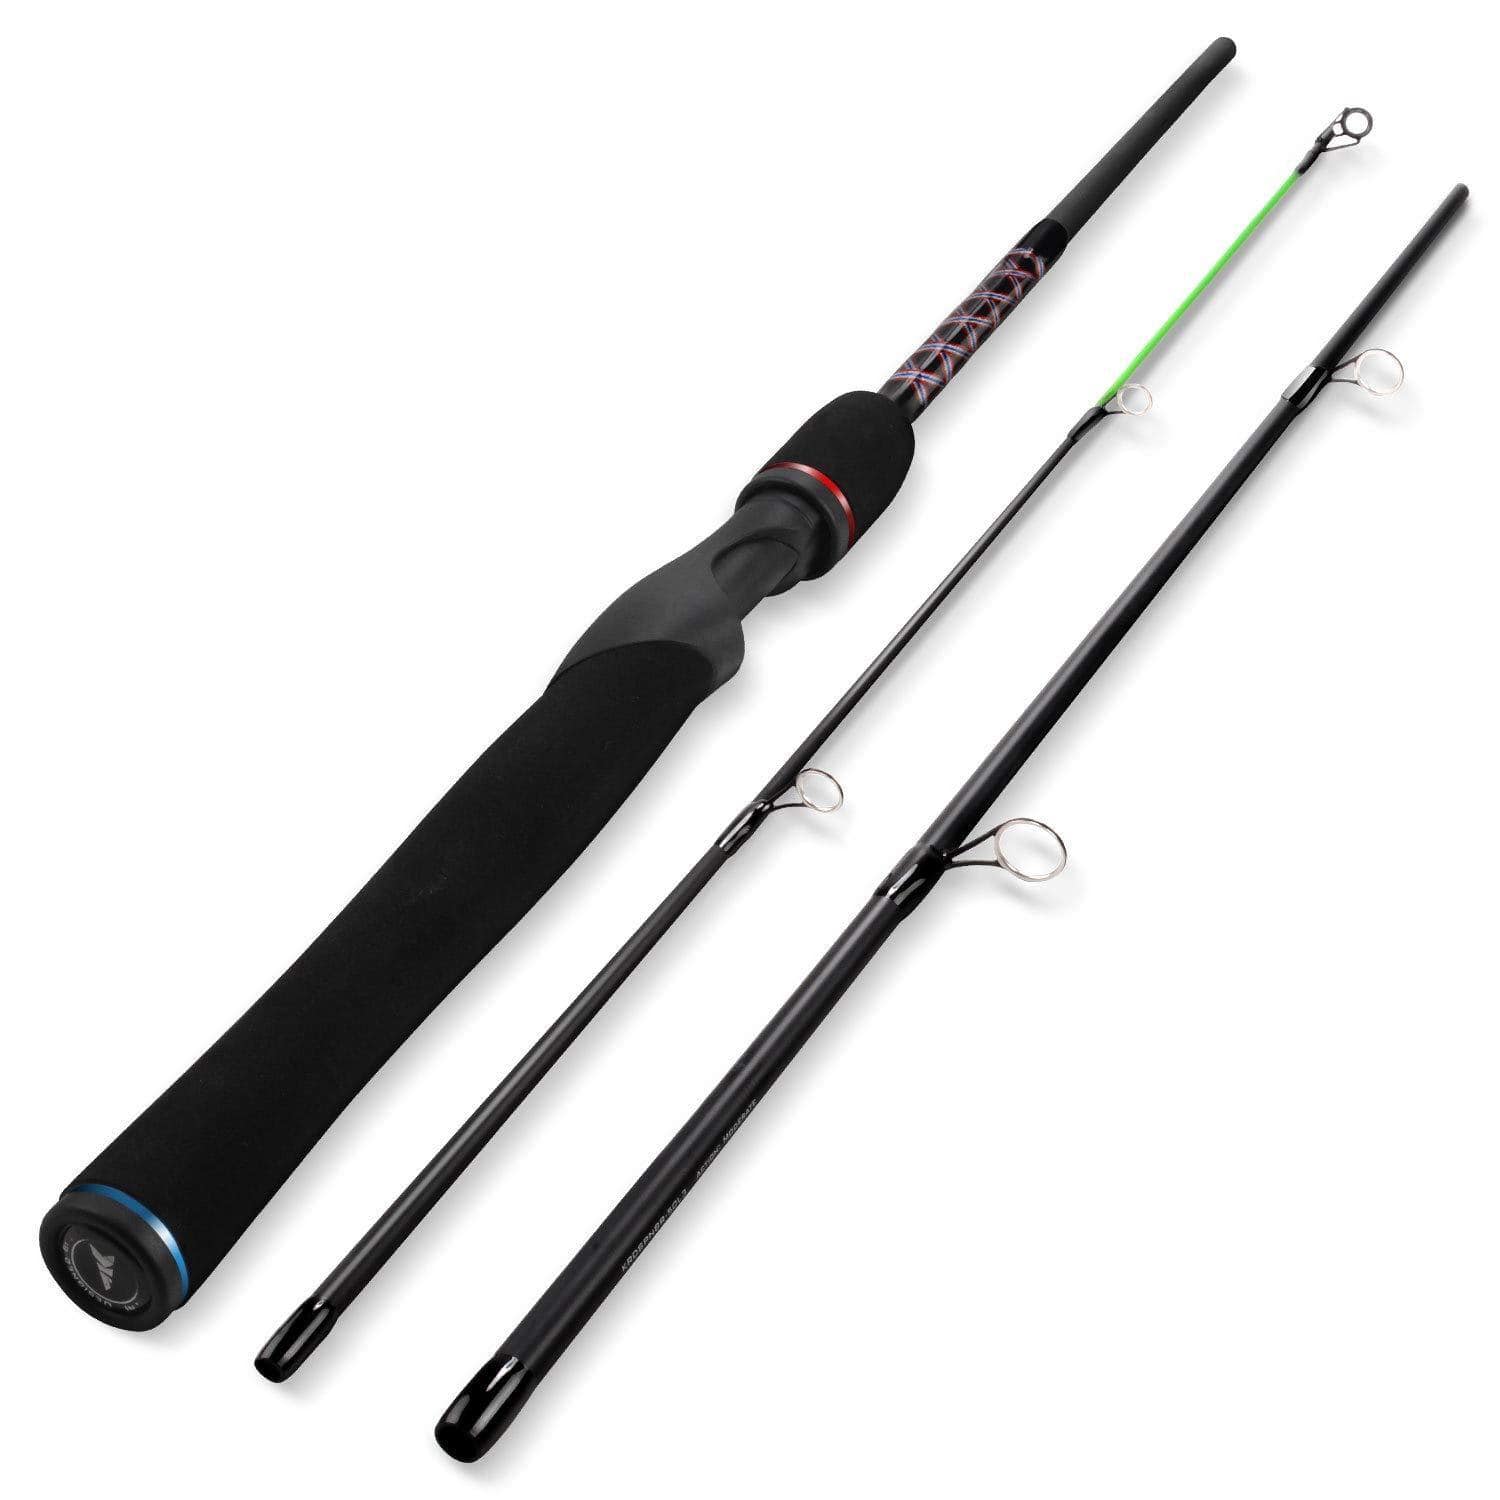 KastKing Brutus Carbon Spinning Ultralight Spinning Rod With